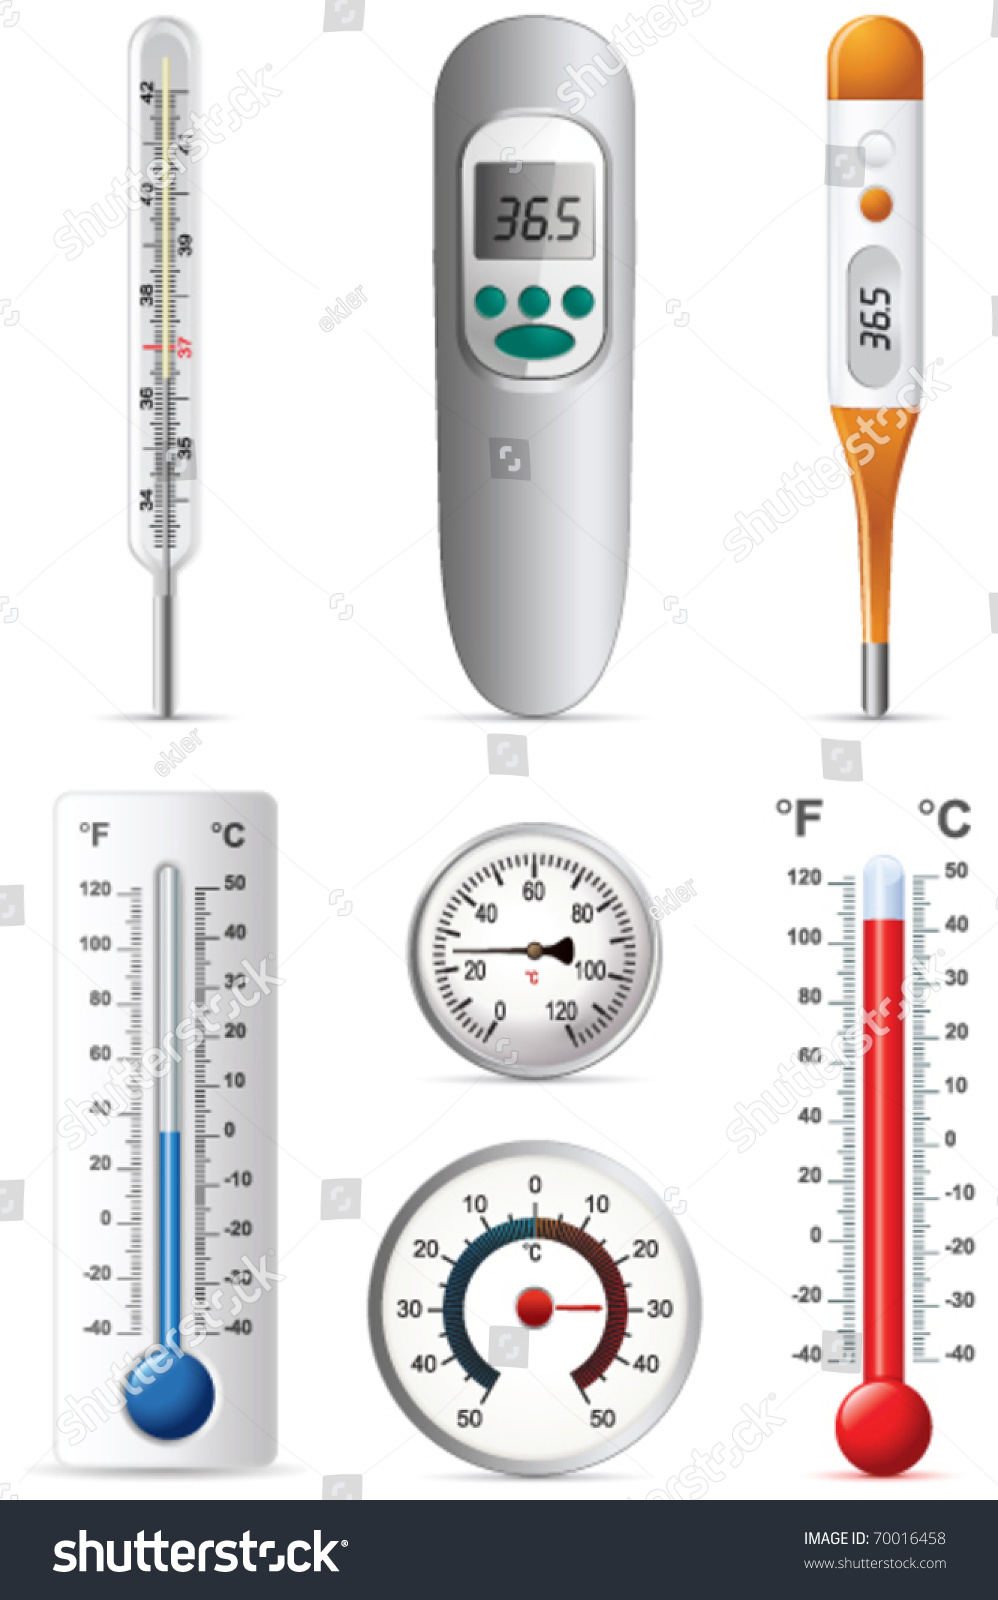 What are the different types of thermometers?